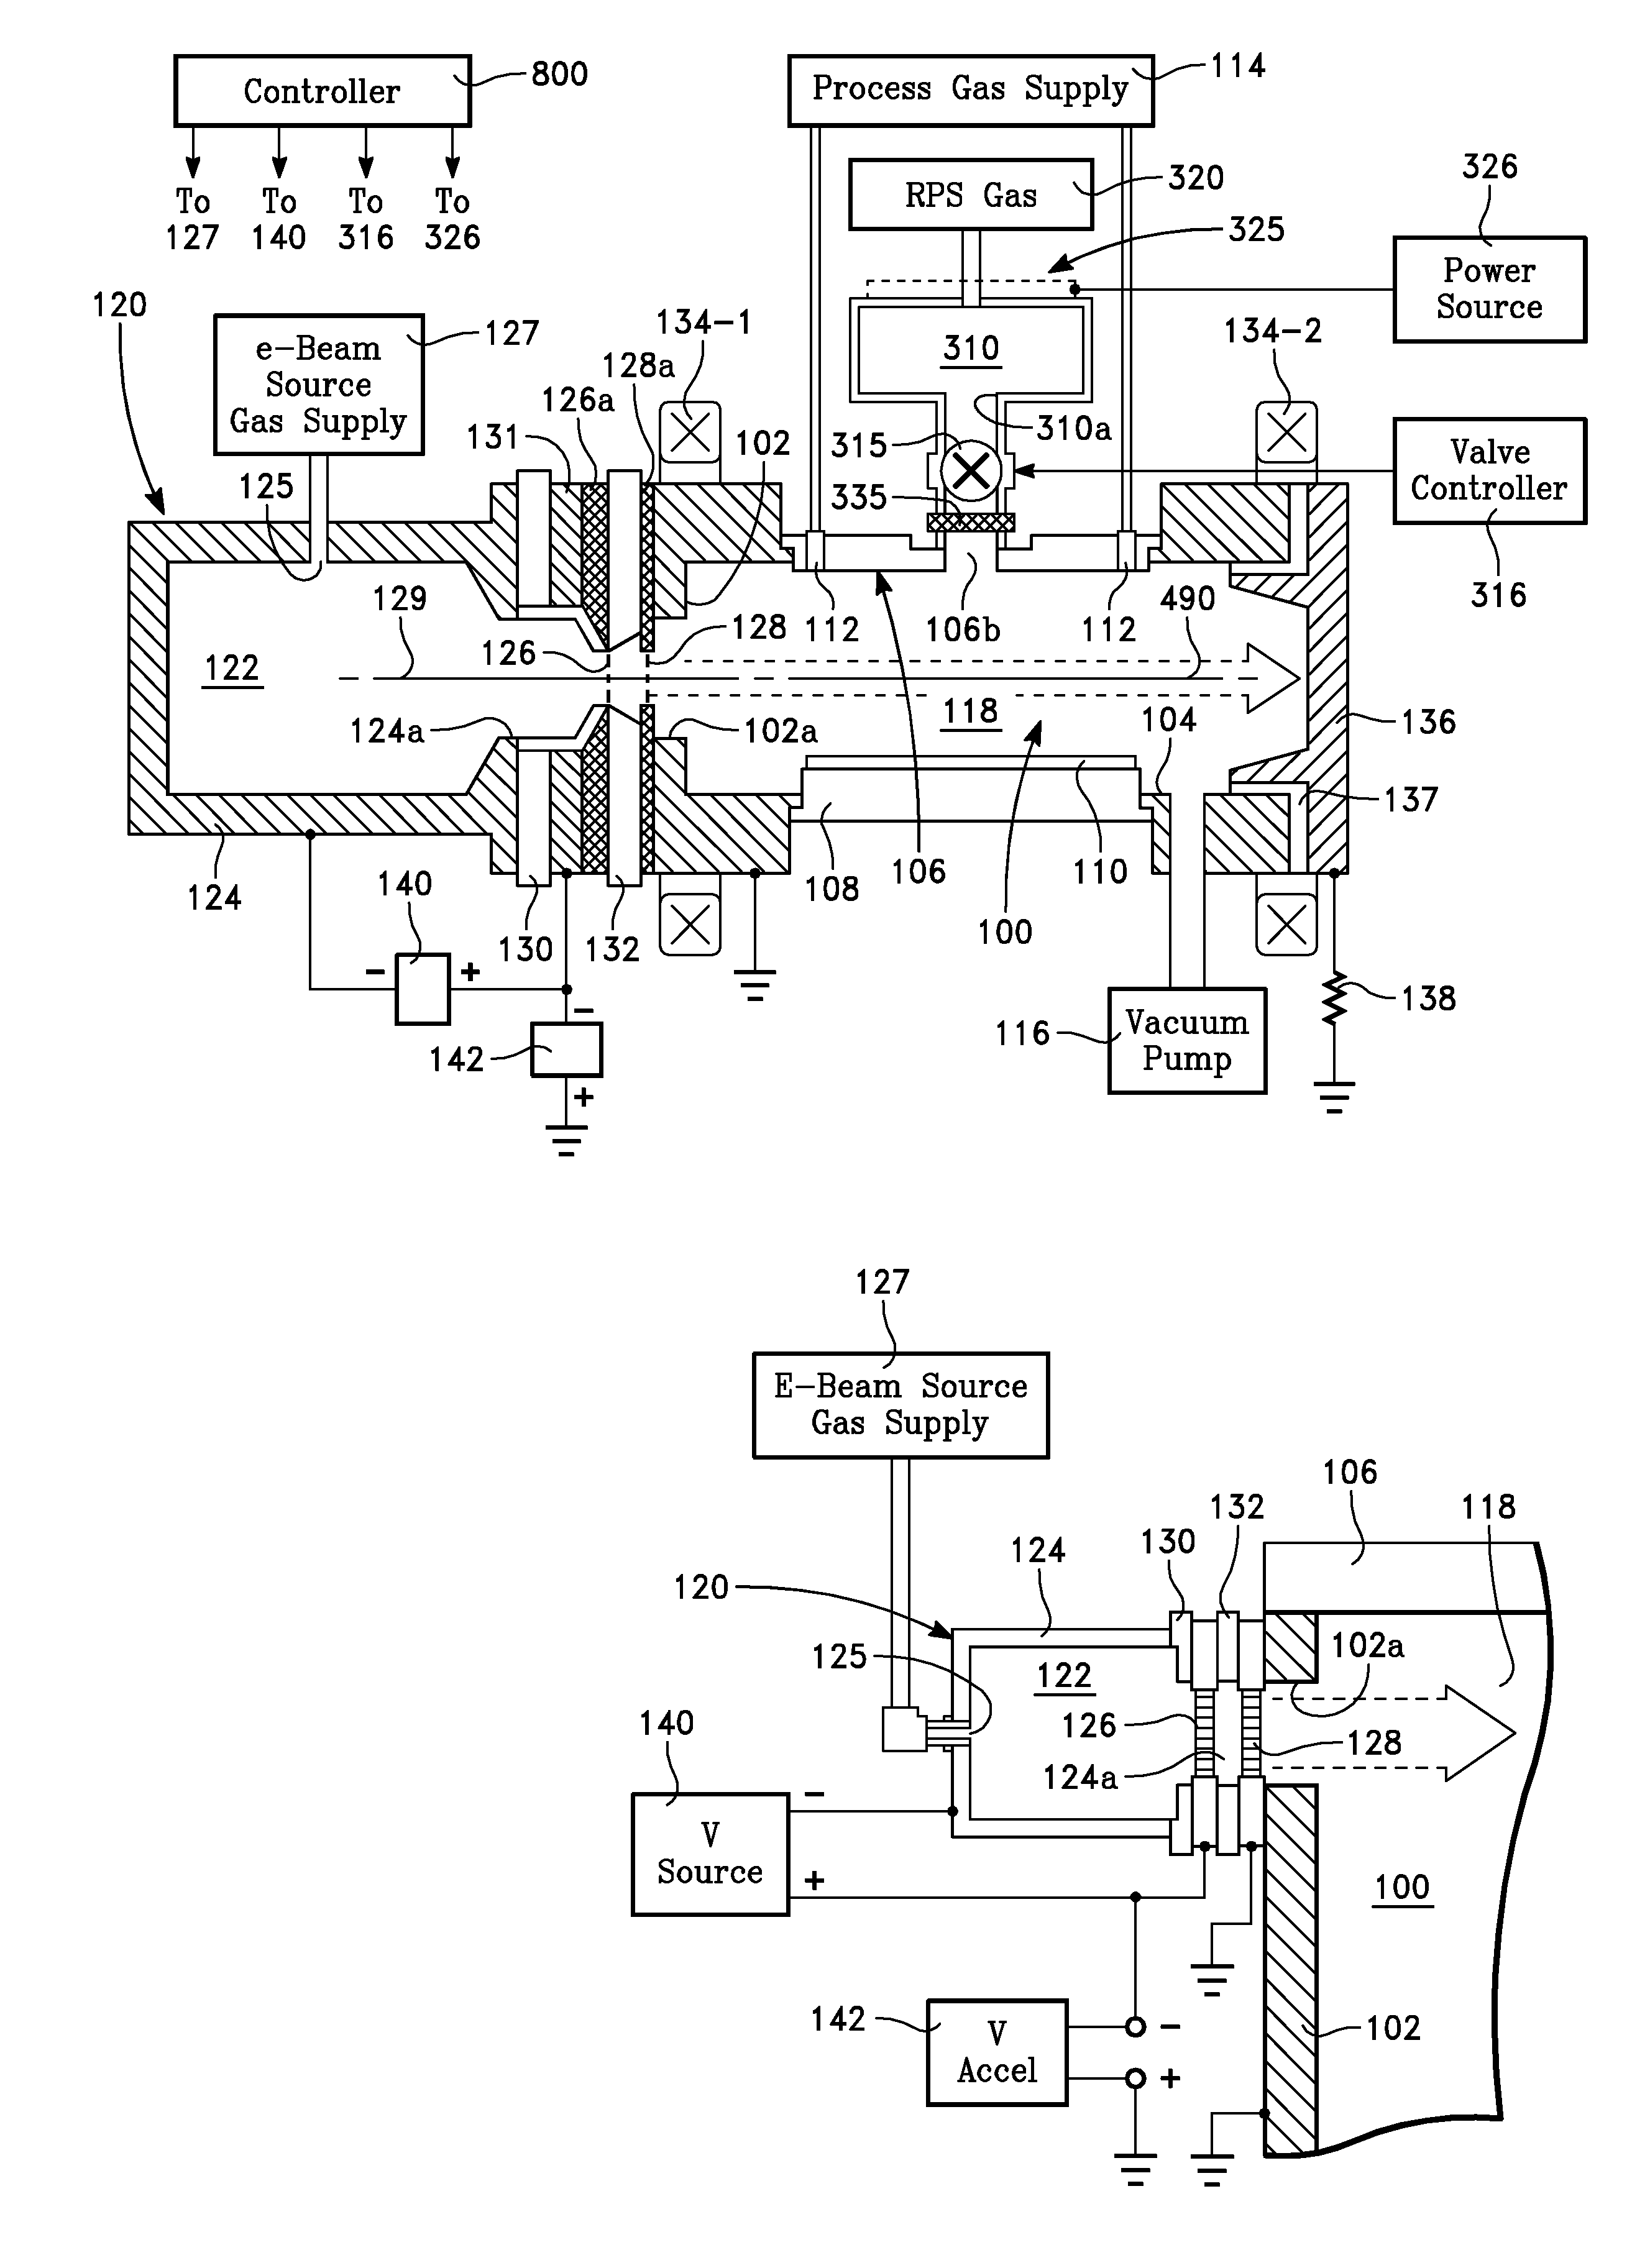 Electron beam plasma source with remote radical source